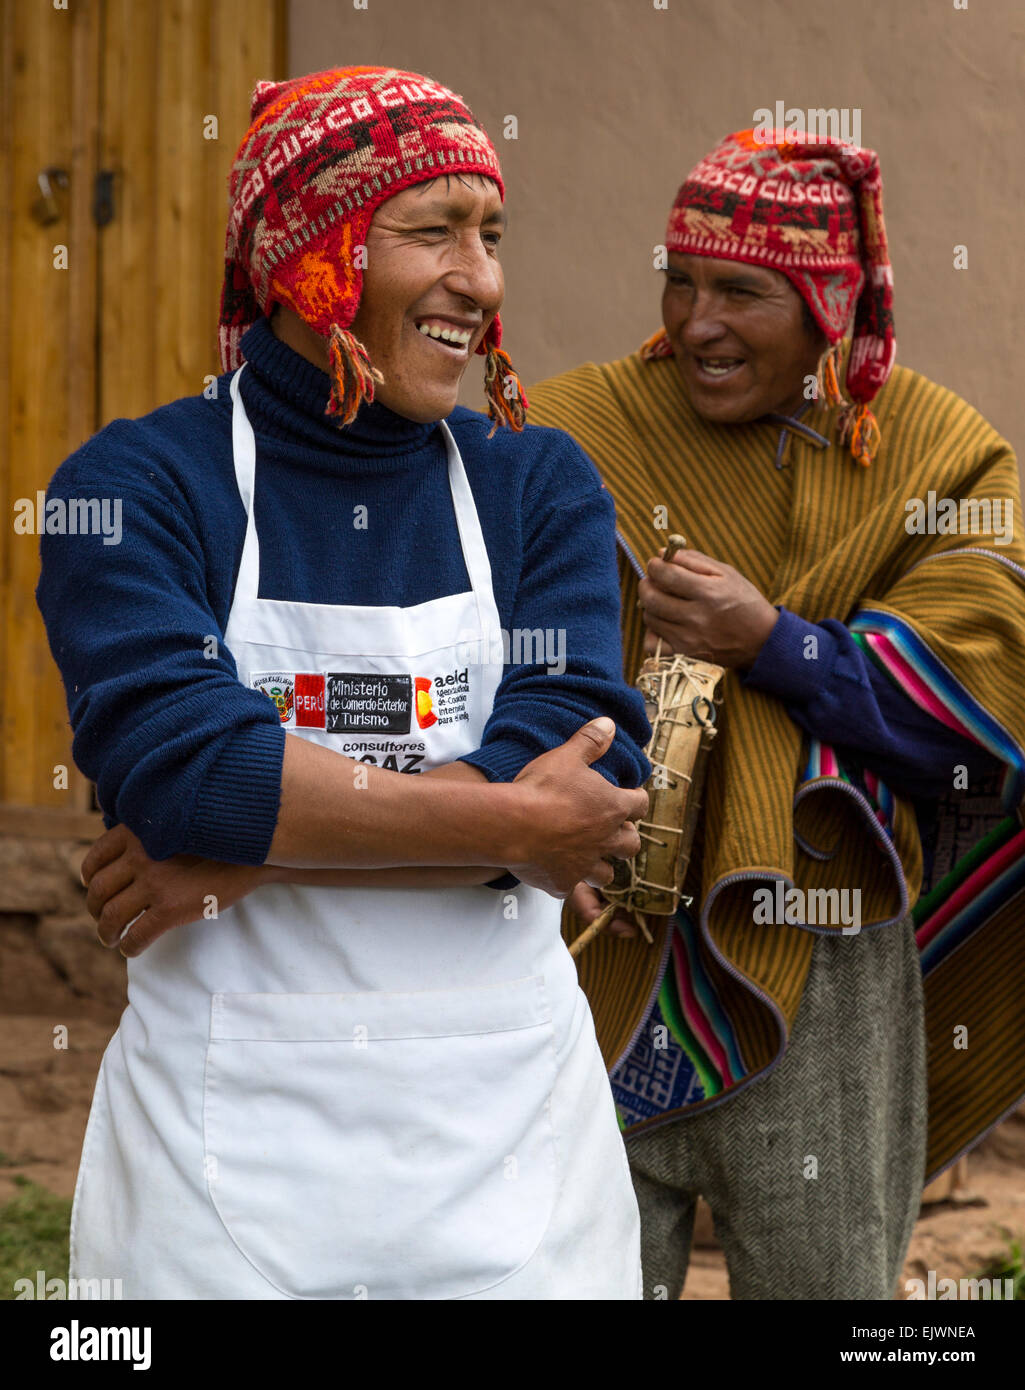 Peru, Urubamba Valley, Quechua Village of Misminay.  Two Men Talking.  The one wearing the apron is a chef. Stock Photo